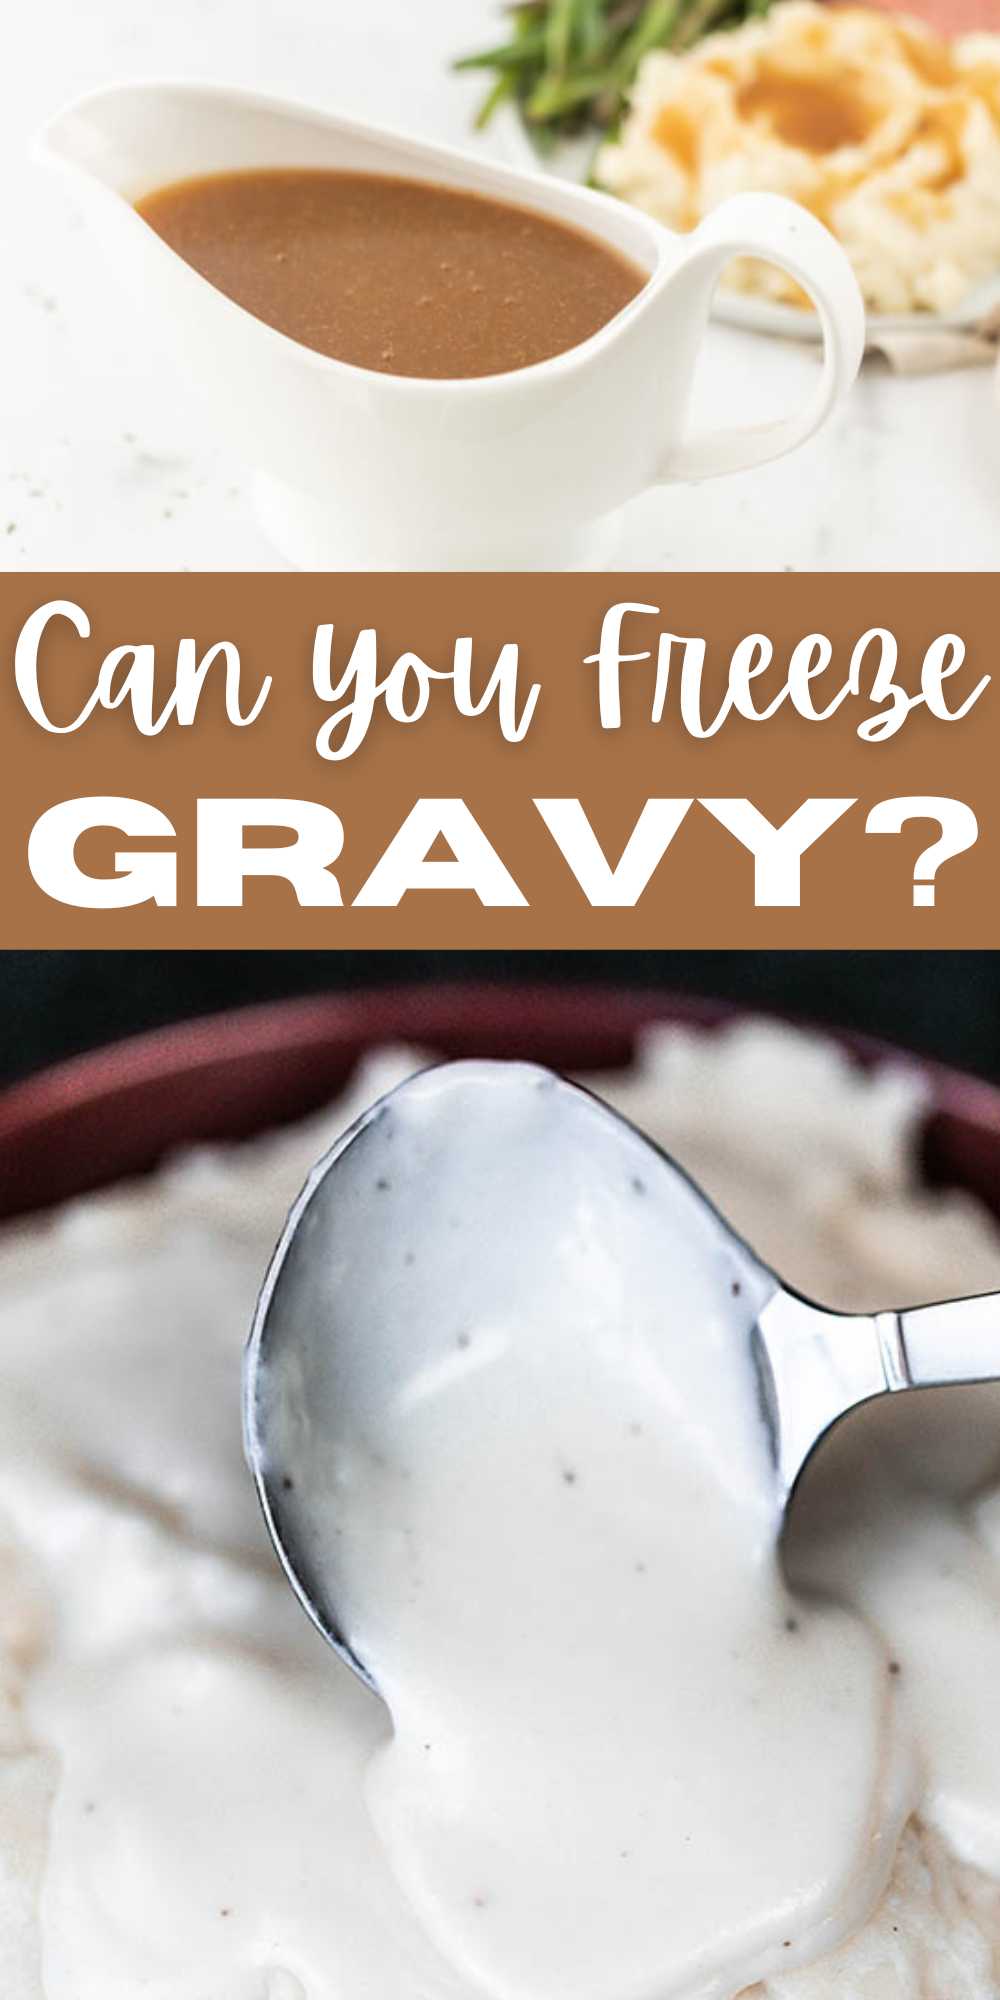 Can you Freeze Gravy? Don't toss out your holiday gravy or your sausage gravy when you can easily freeze to use again. These helpful tips will have you enjoying gravy throughout the year. #eatingonadime #howtofreezegravy #gravy #holidays #leftover